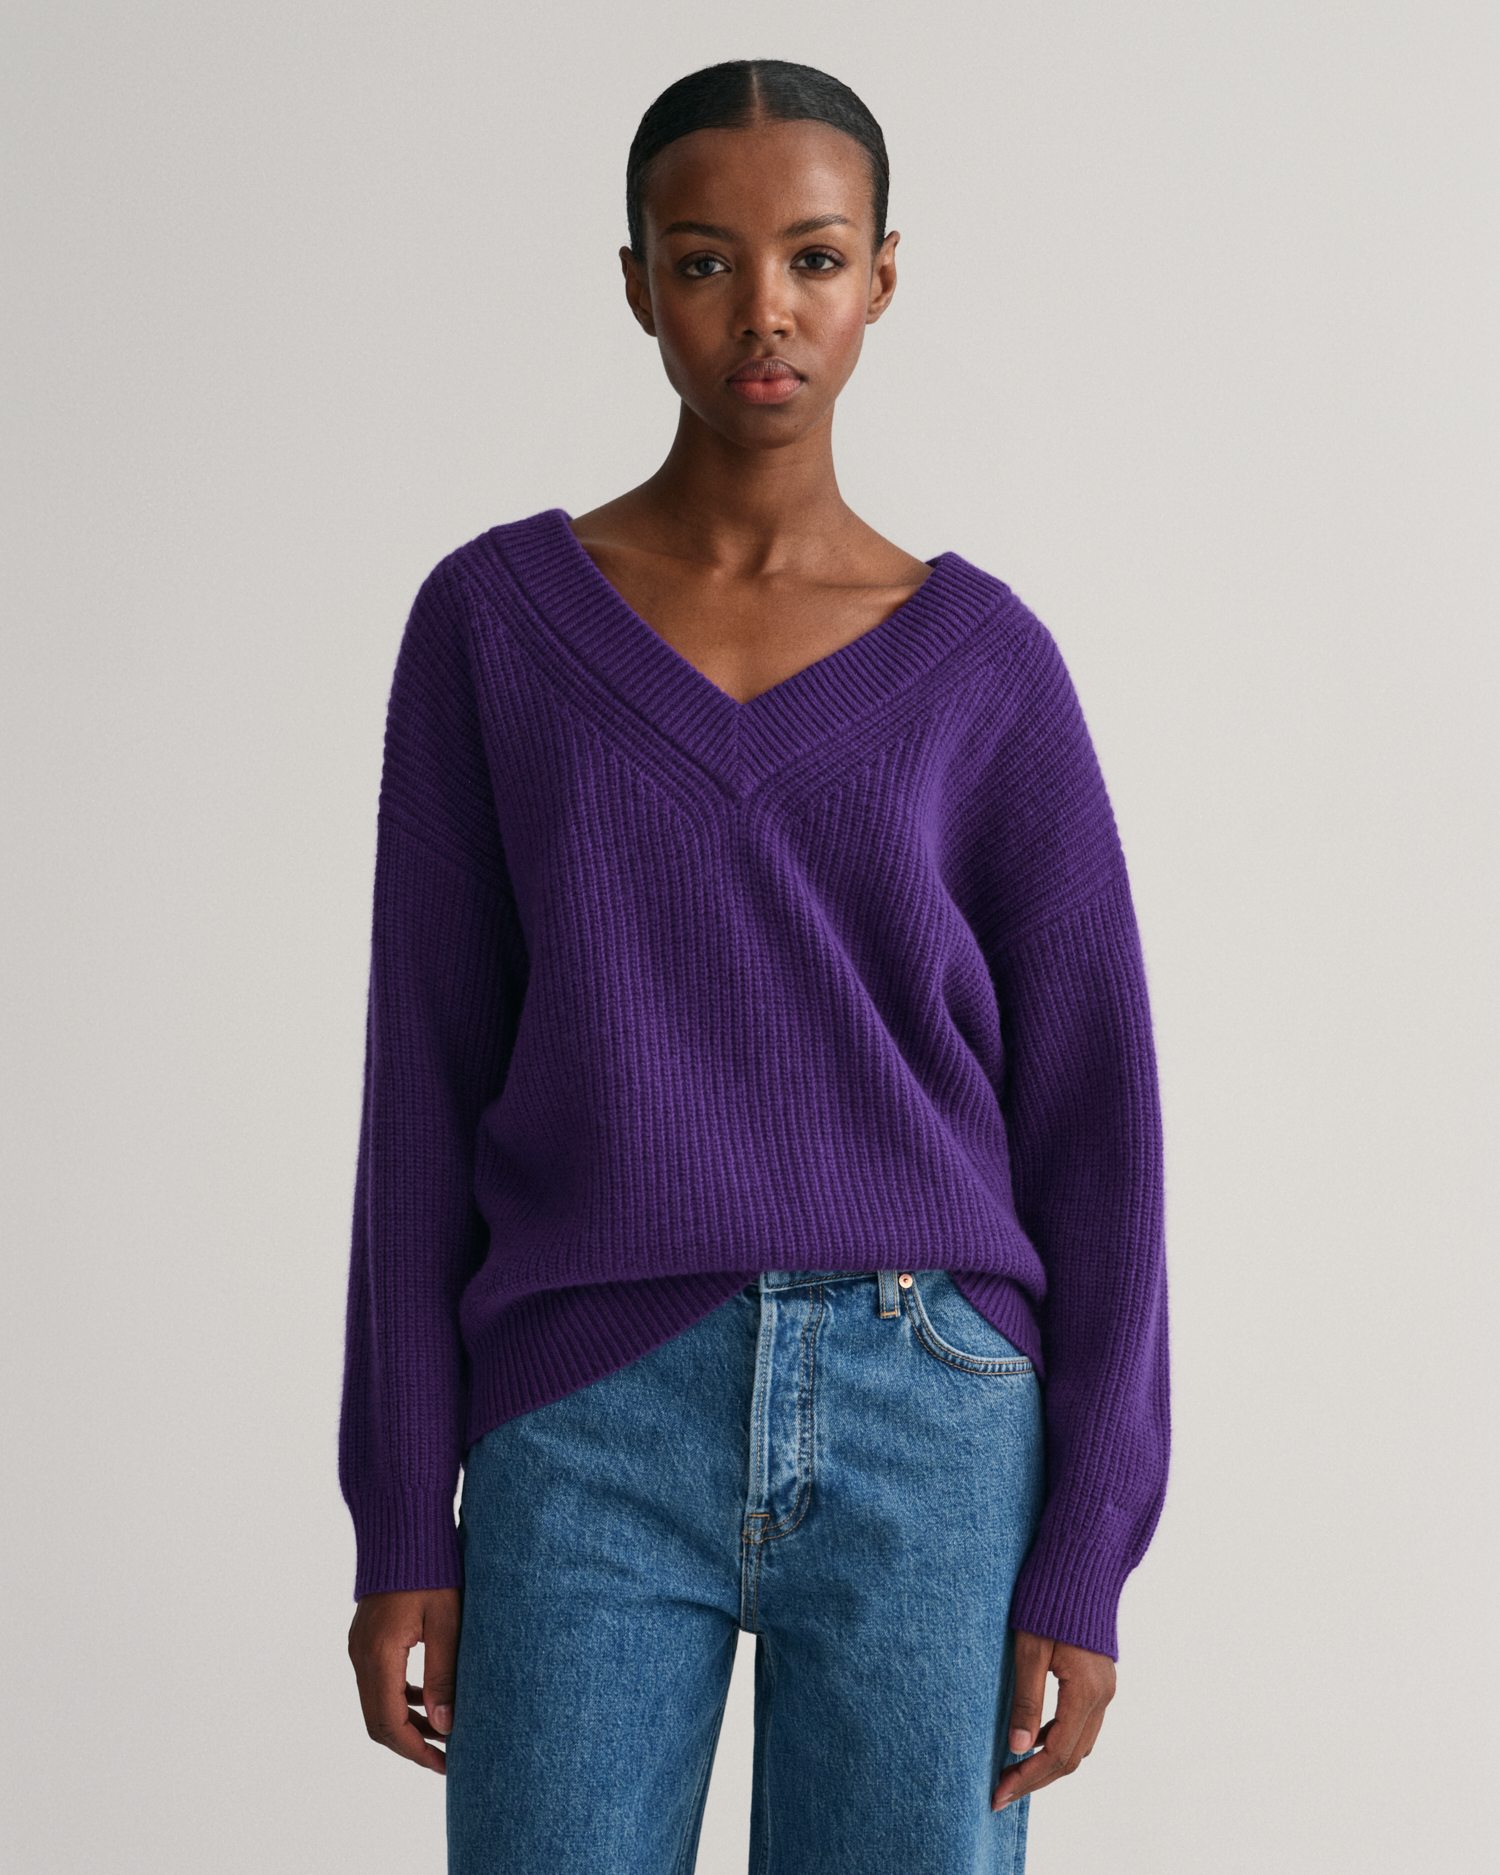 v neck pullover for women - OFF-59% > Shipping free